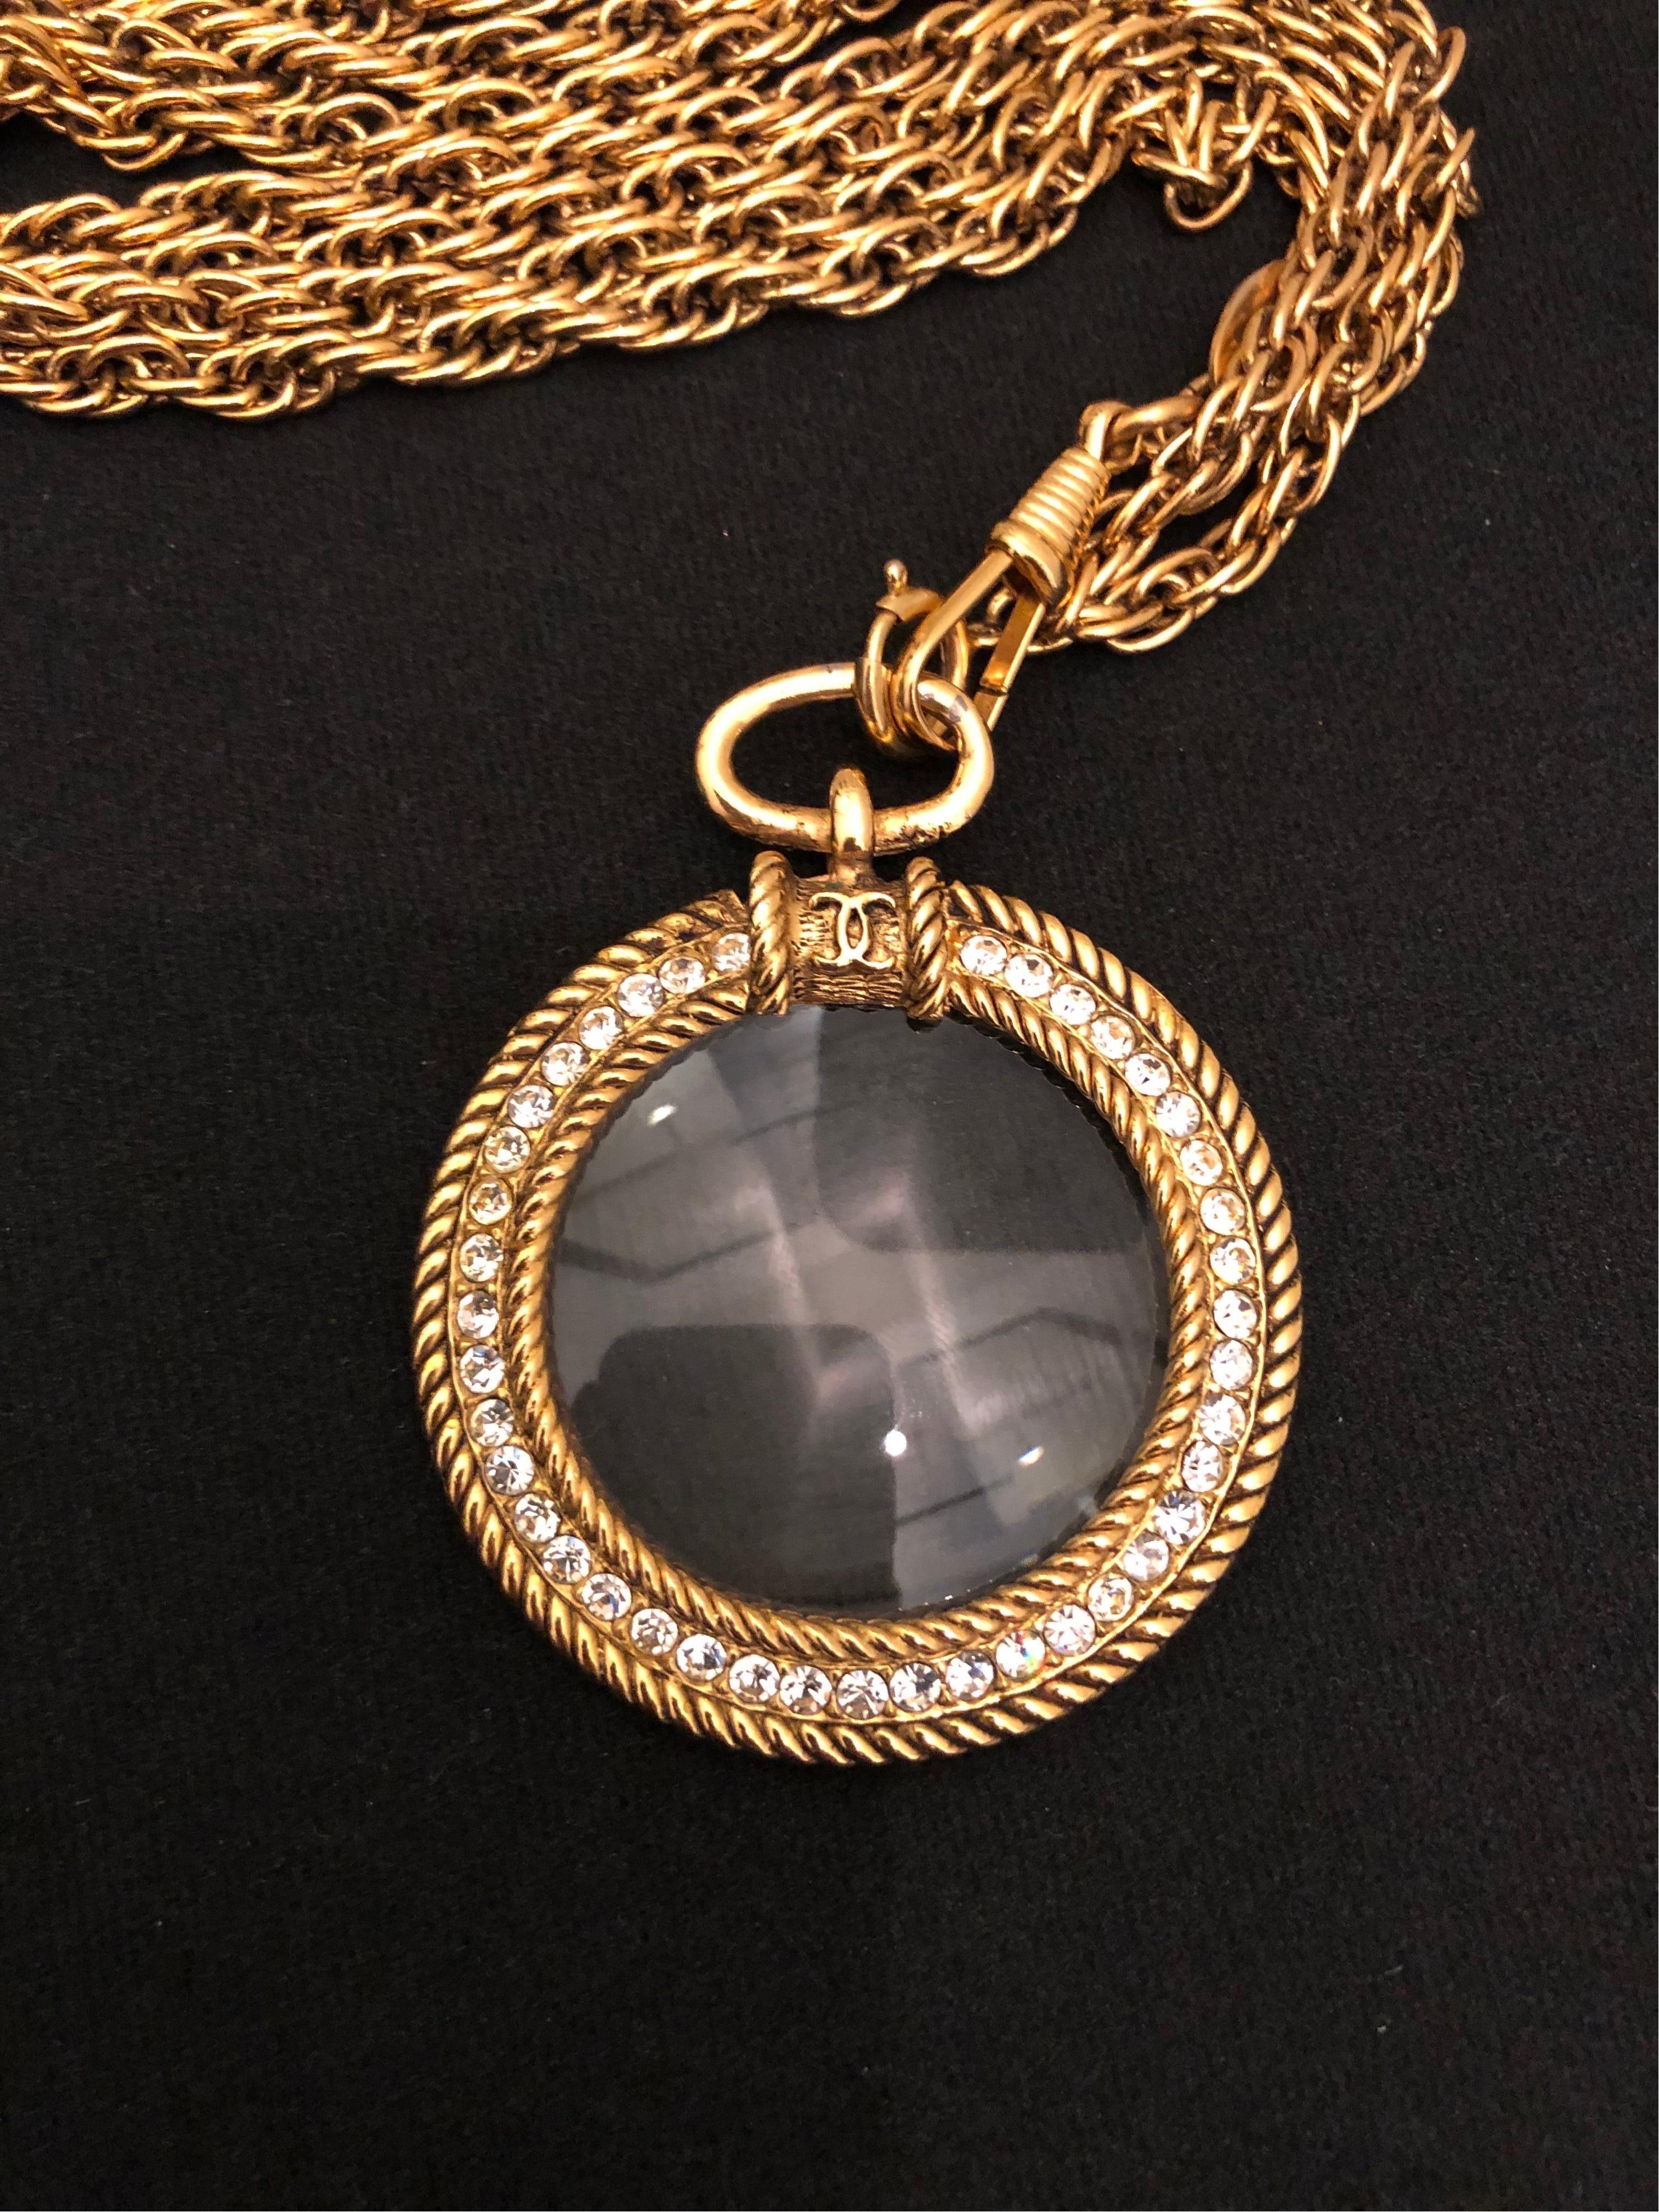 1980s Chanel double gold toned chain necklace featuring a rhinestone encrusted magnifying lens. Spring ring fastening. Stamped Chanel 1984, made in France. Total length 90 cm (35.5 inches) Magnifying lens 5 cm in diameter. Comes with box.